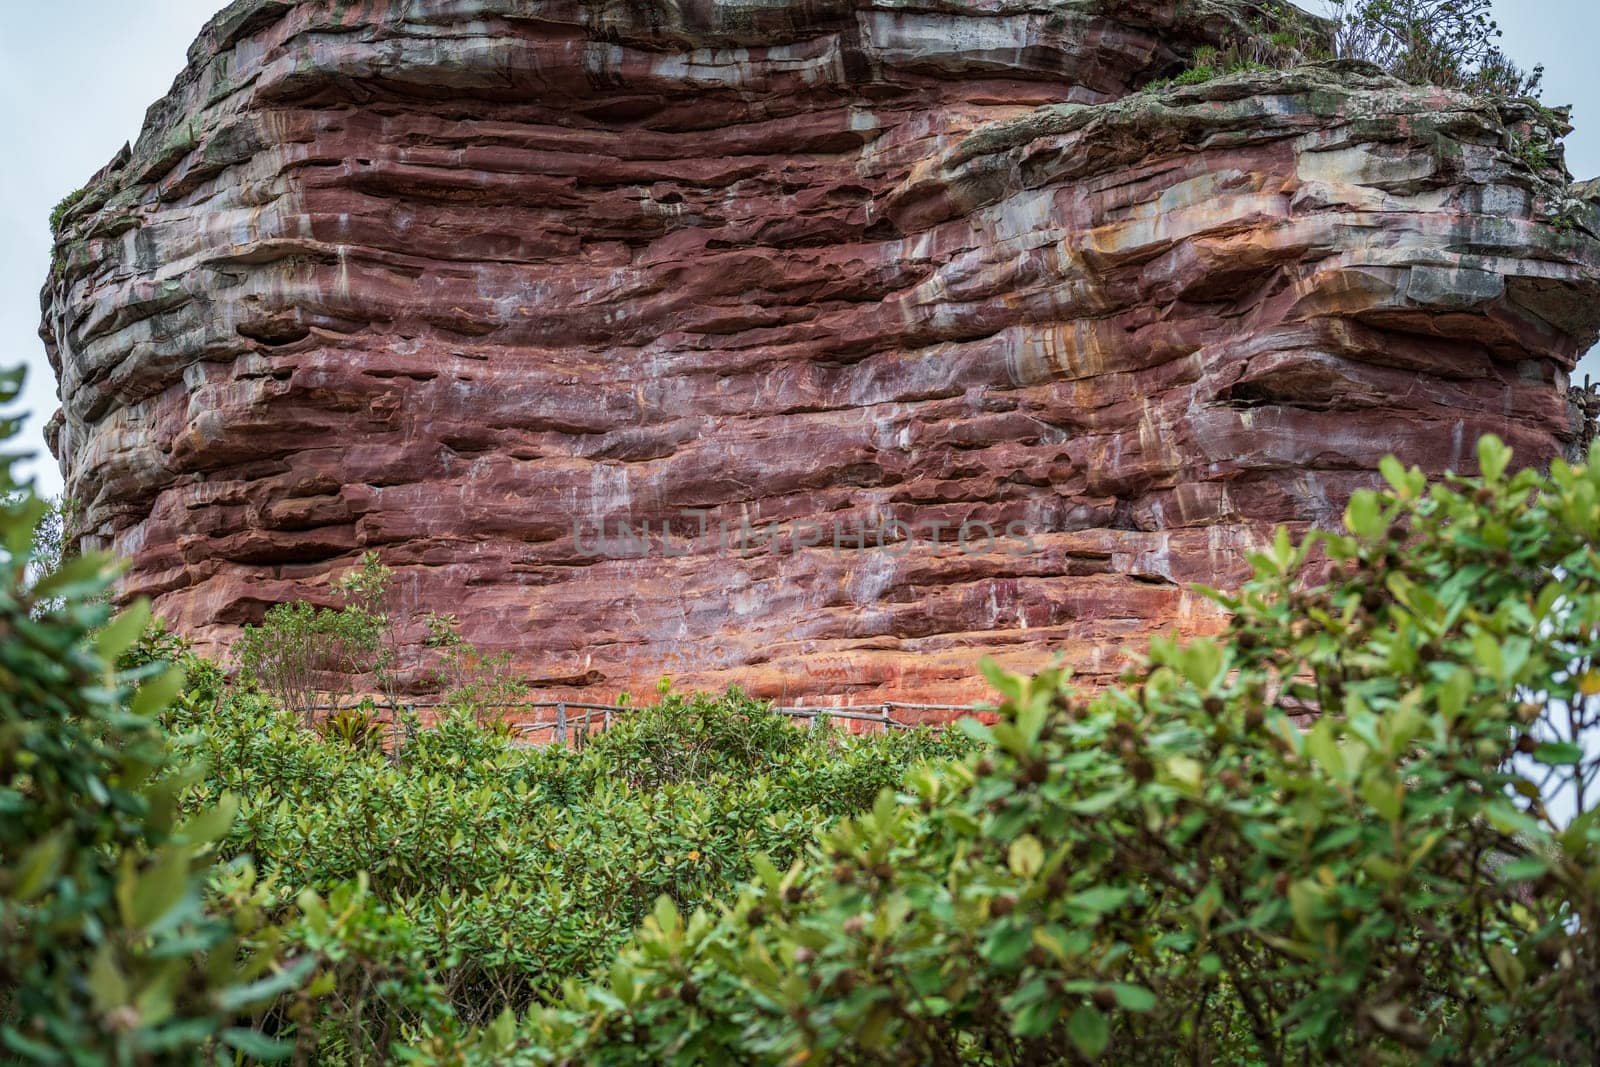 Majestic Red Sandstone Cliff Surrounded by Lush Greenery by FerradalFCG